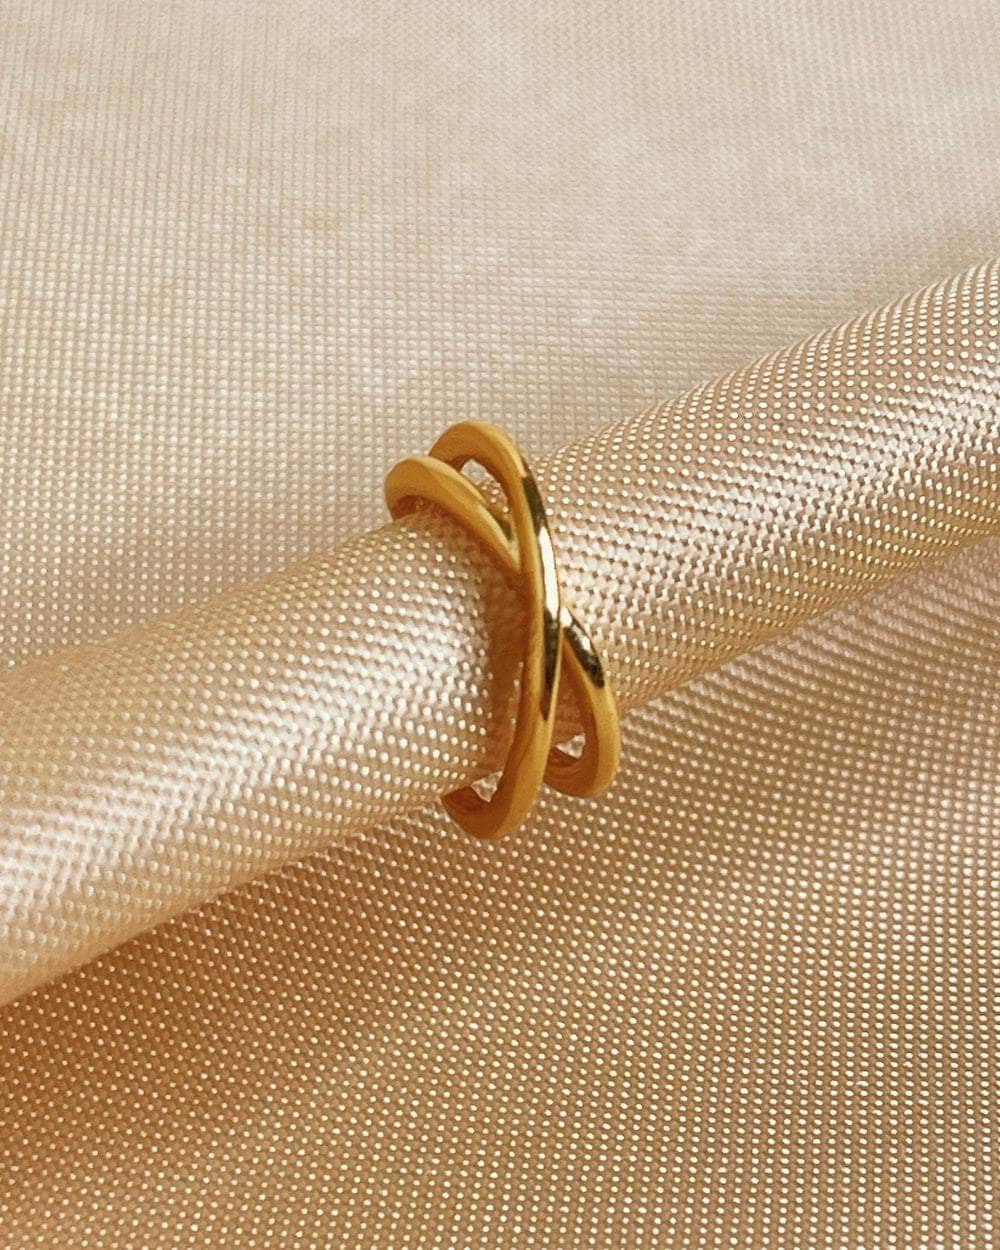 So Dainty Co. Ear Cuffs Sophie Gold Cuff (Single) Gold Plated 925 Sterling Silver Jewelry